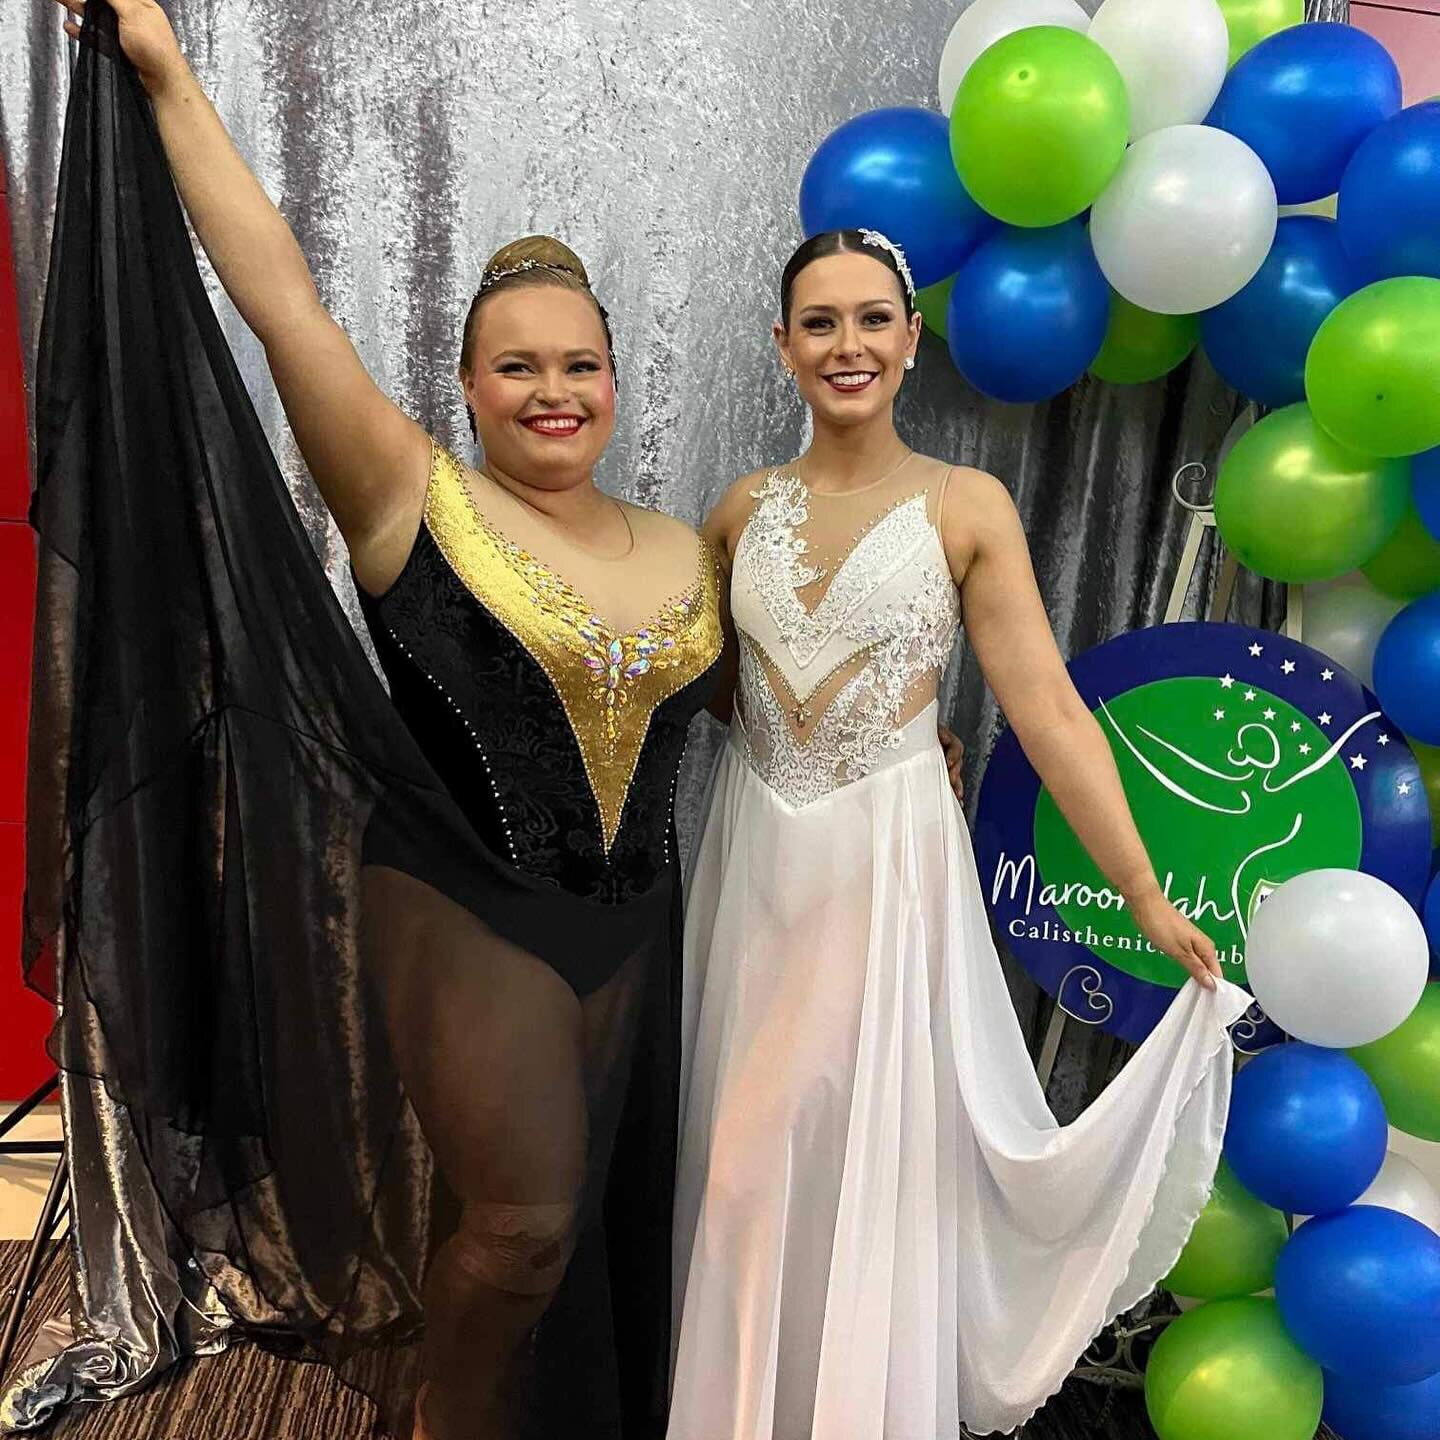 What a HUGE weekend of solos!
Congratulations to all our beautiful soloists who took to the stage for the last weekend of Metro comps! What fantastic performances across the board&hellip;. Bring on STATE CHAMPS! 🎉 

🌟 Sienna - 10 Year Cali - HM
🌟 